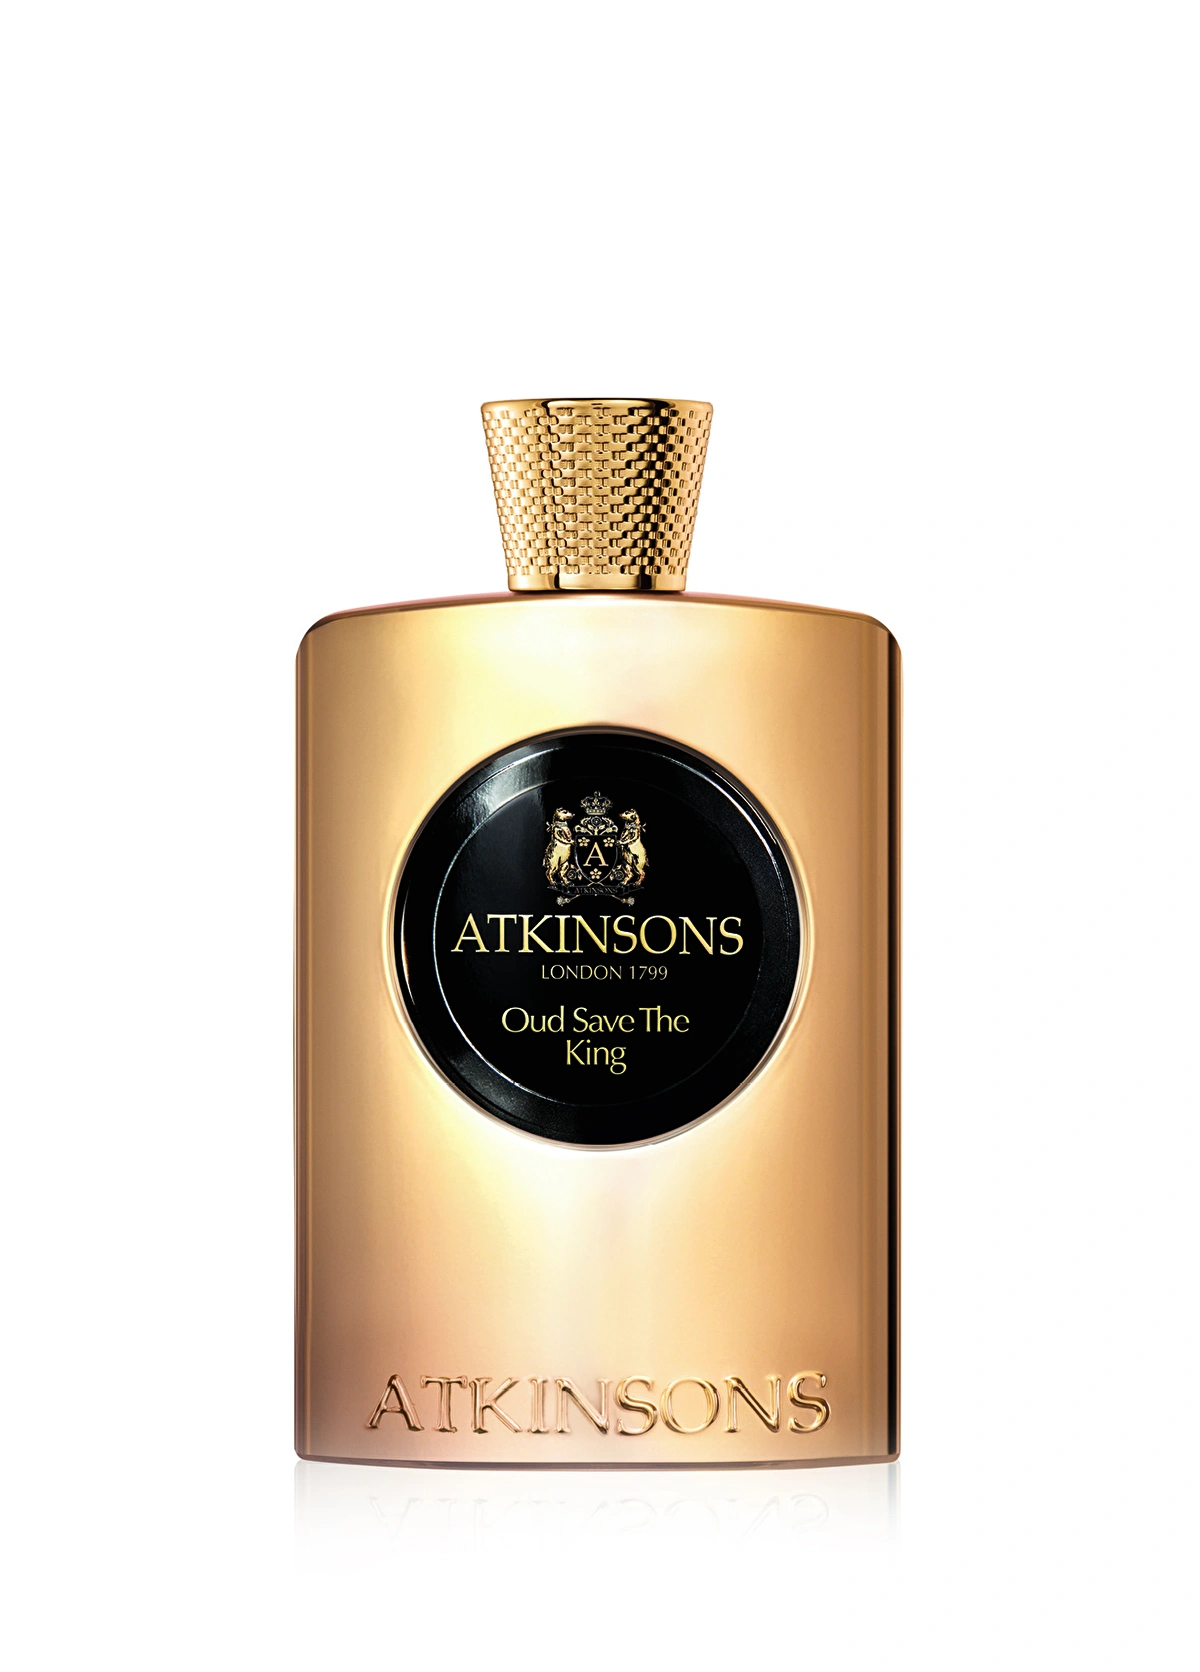 Atkinsons Oud Save The King Edp 100 ml - 2